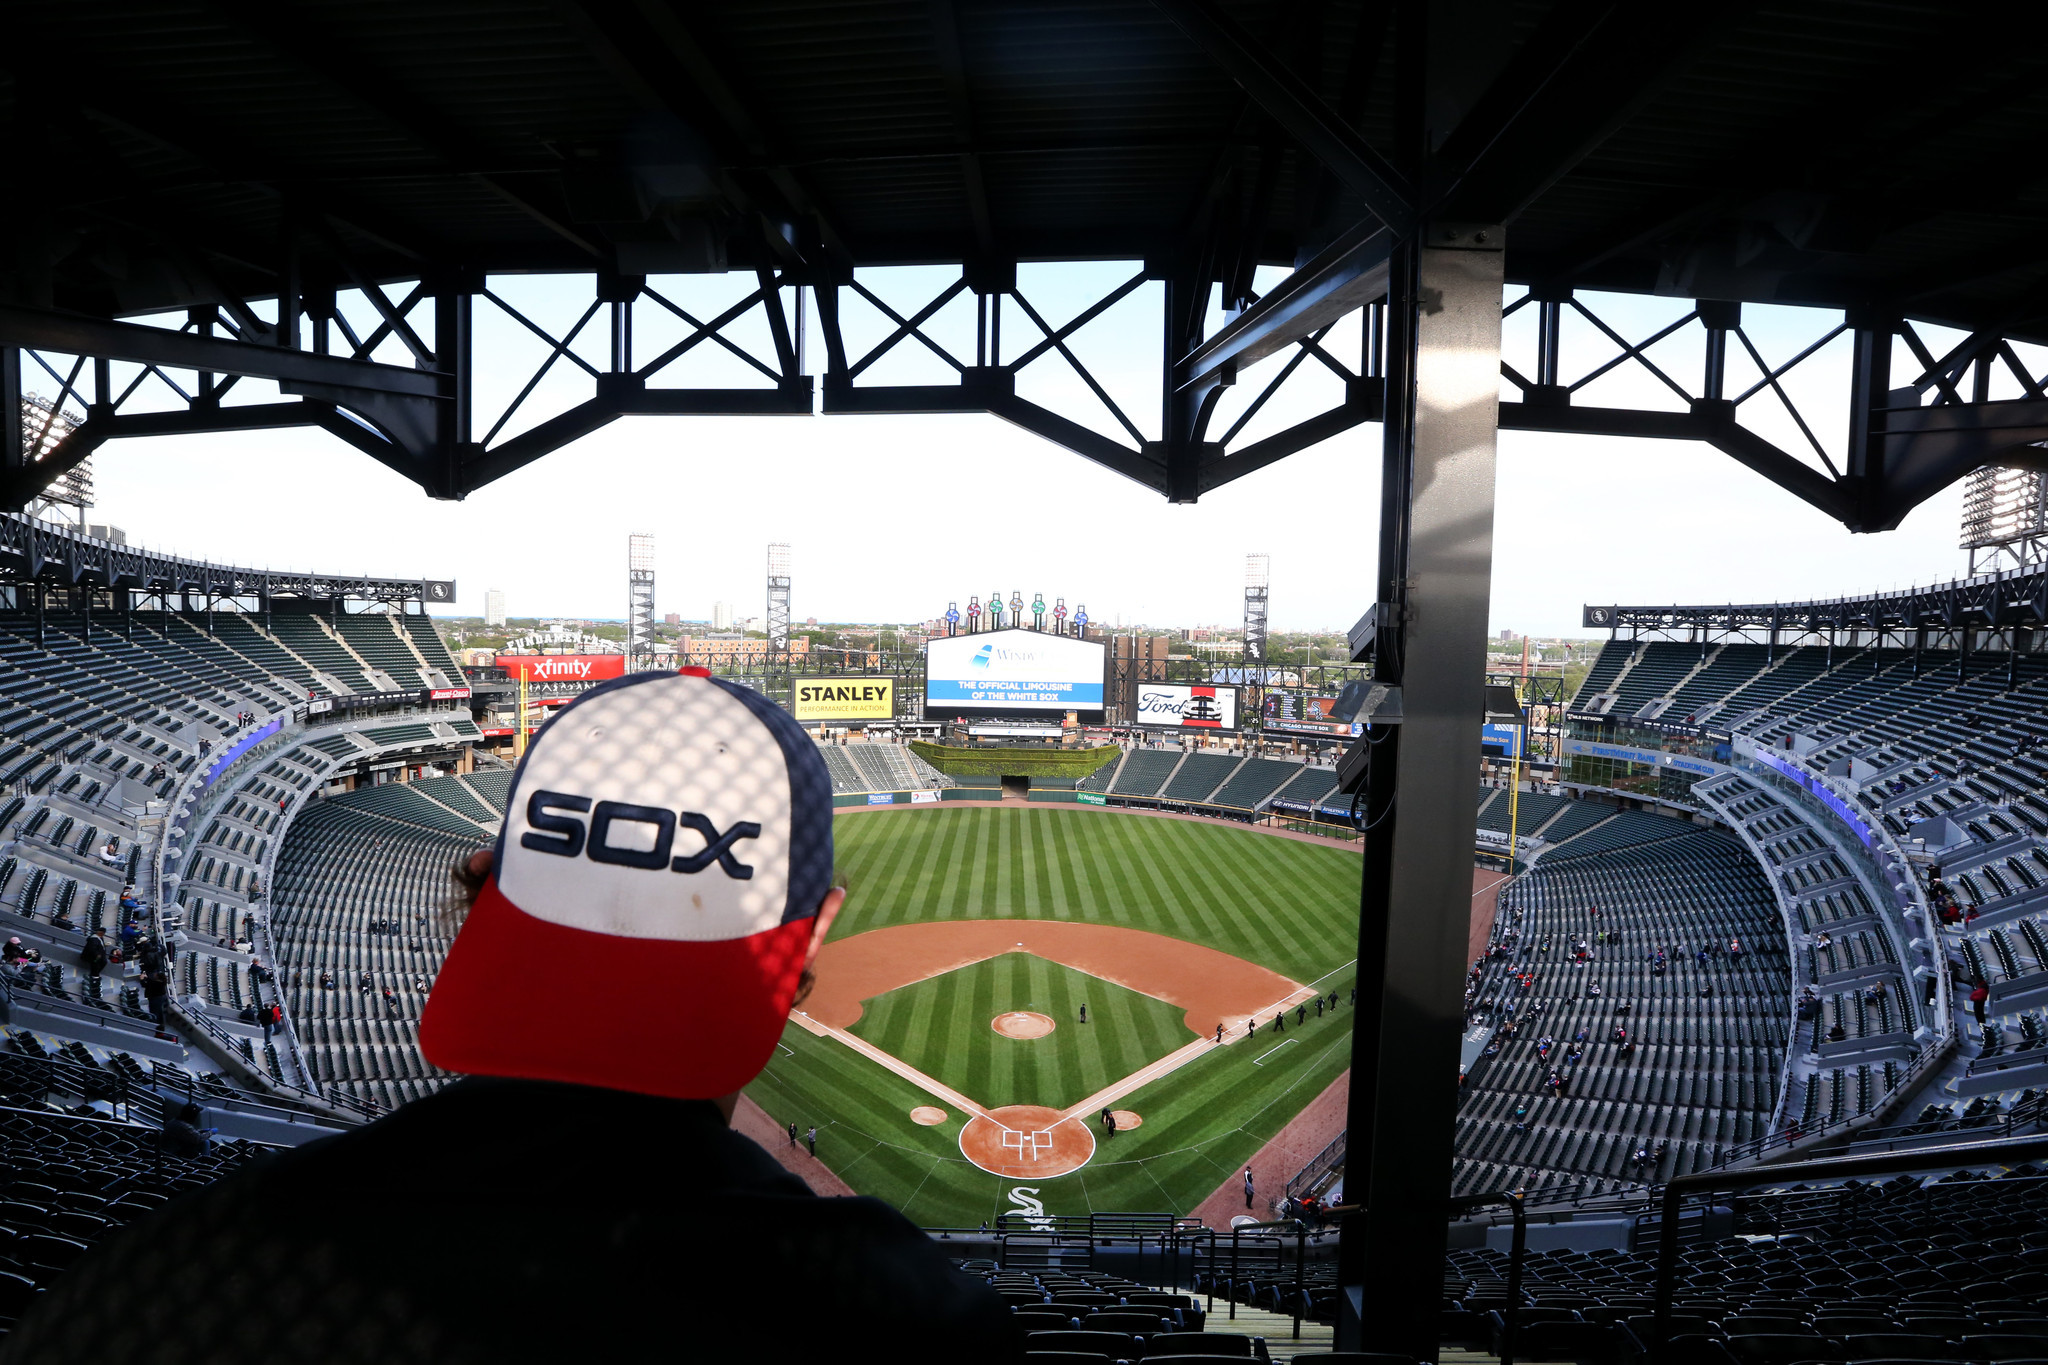 Behind the Ballpark, by Chicago White Sox